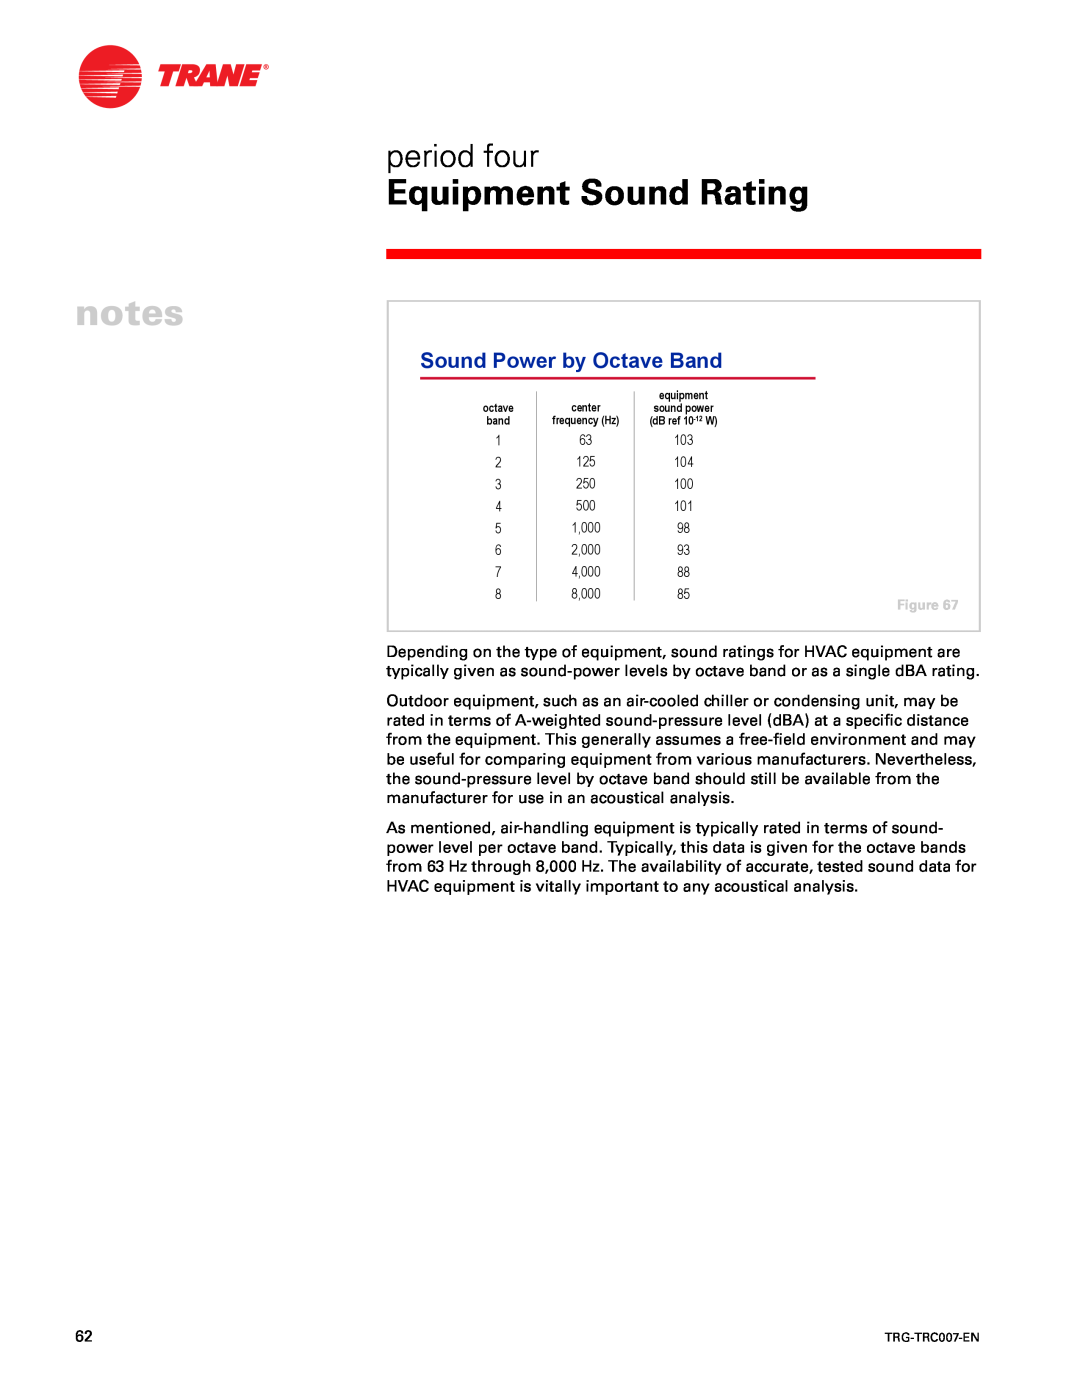 Trane TRG-TRC007-EN manual Sound Power by Octave Band, Equipment Sound Rating, period four, 1 2 3, 103 